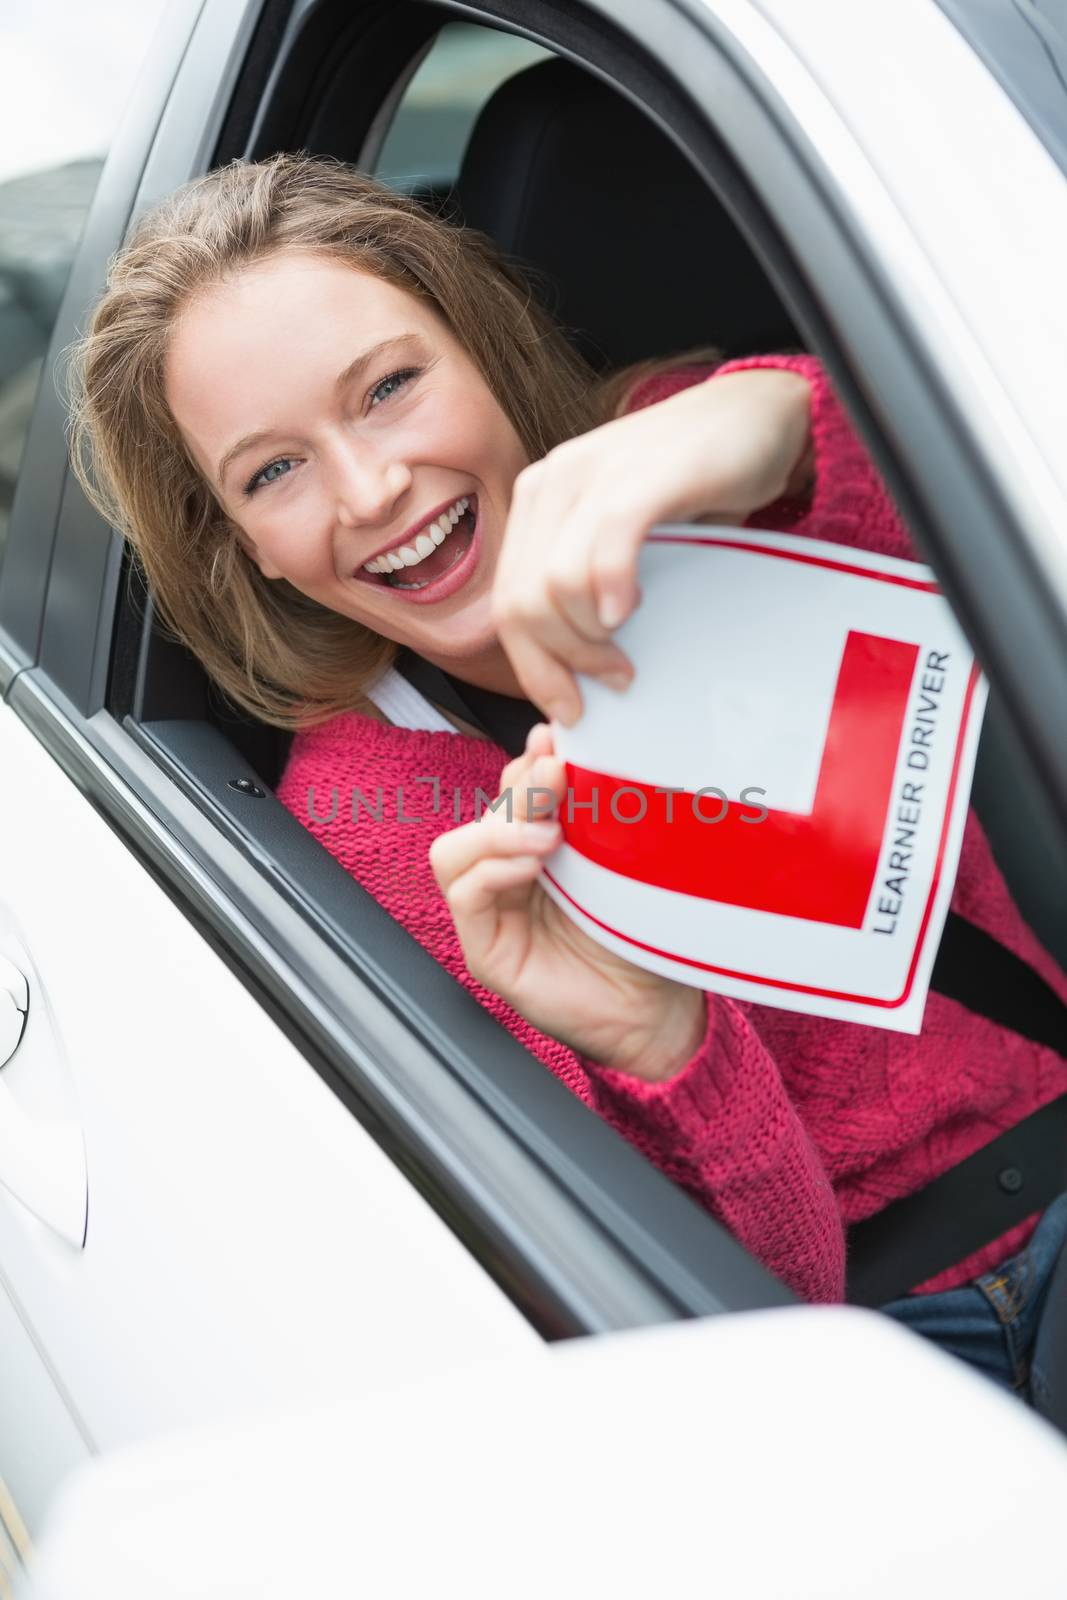 Learner driver smiling and holding l plate  by Wavebreakmedia